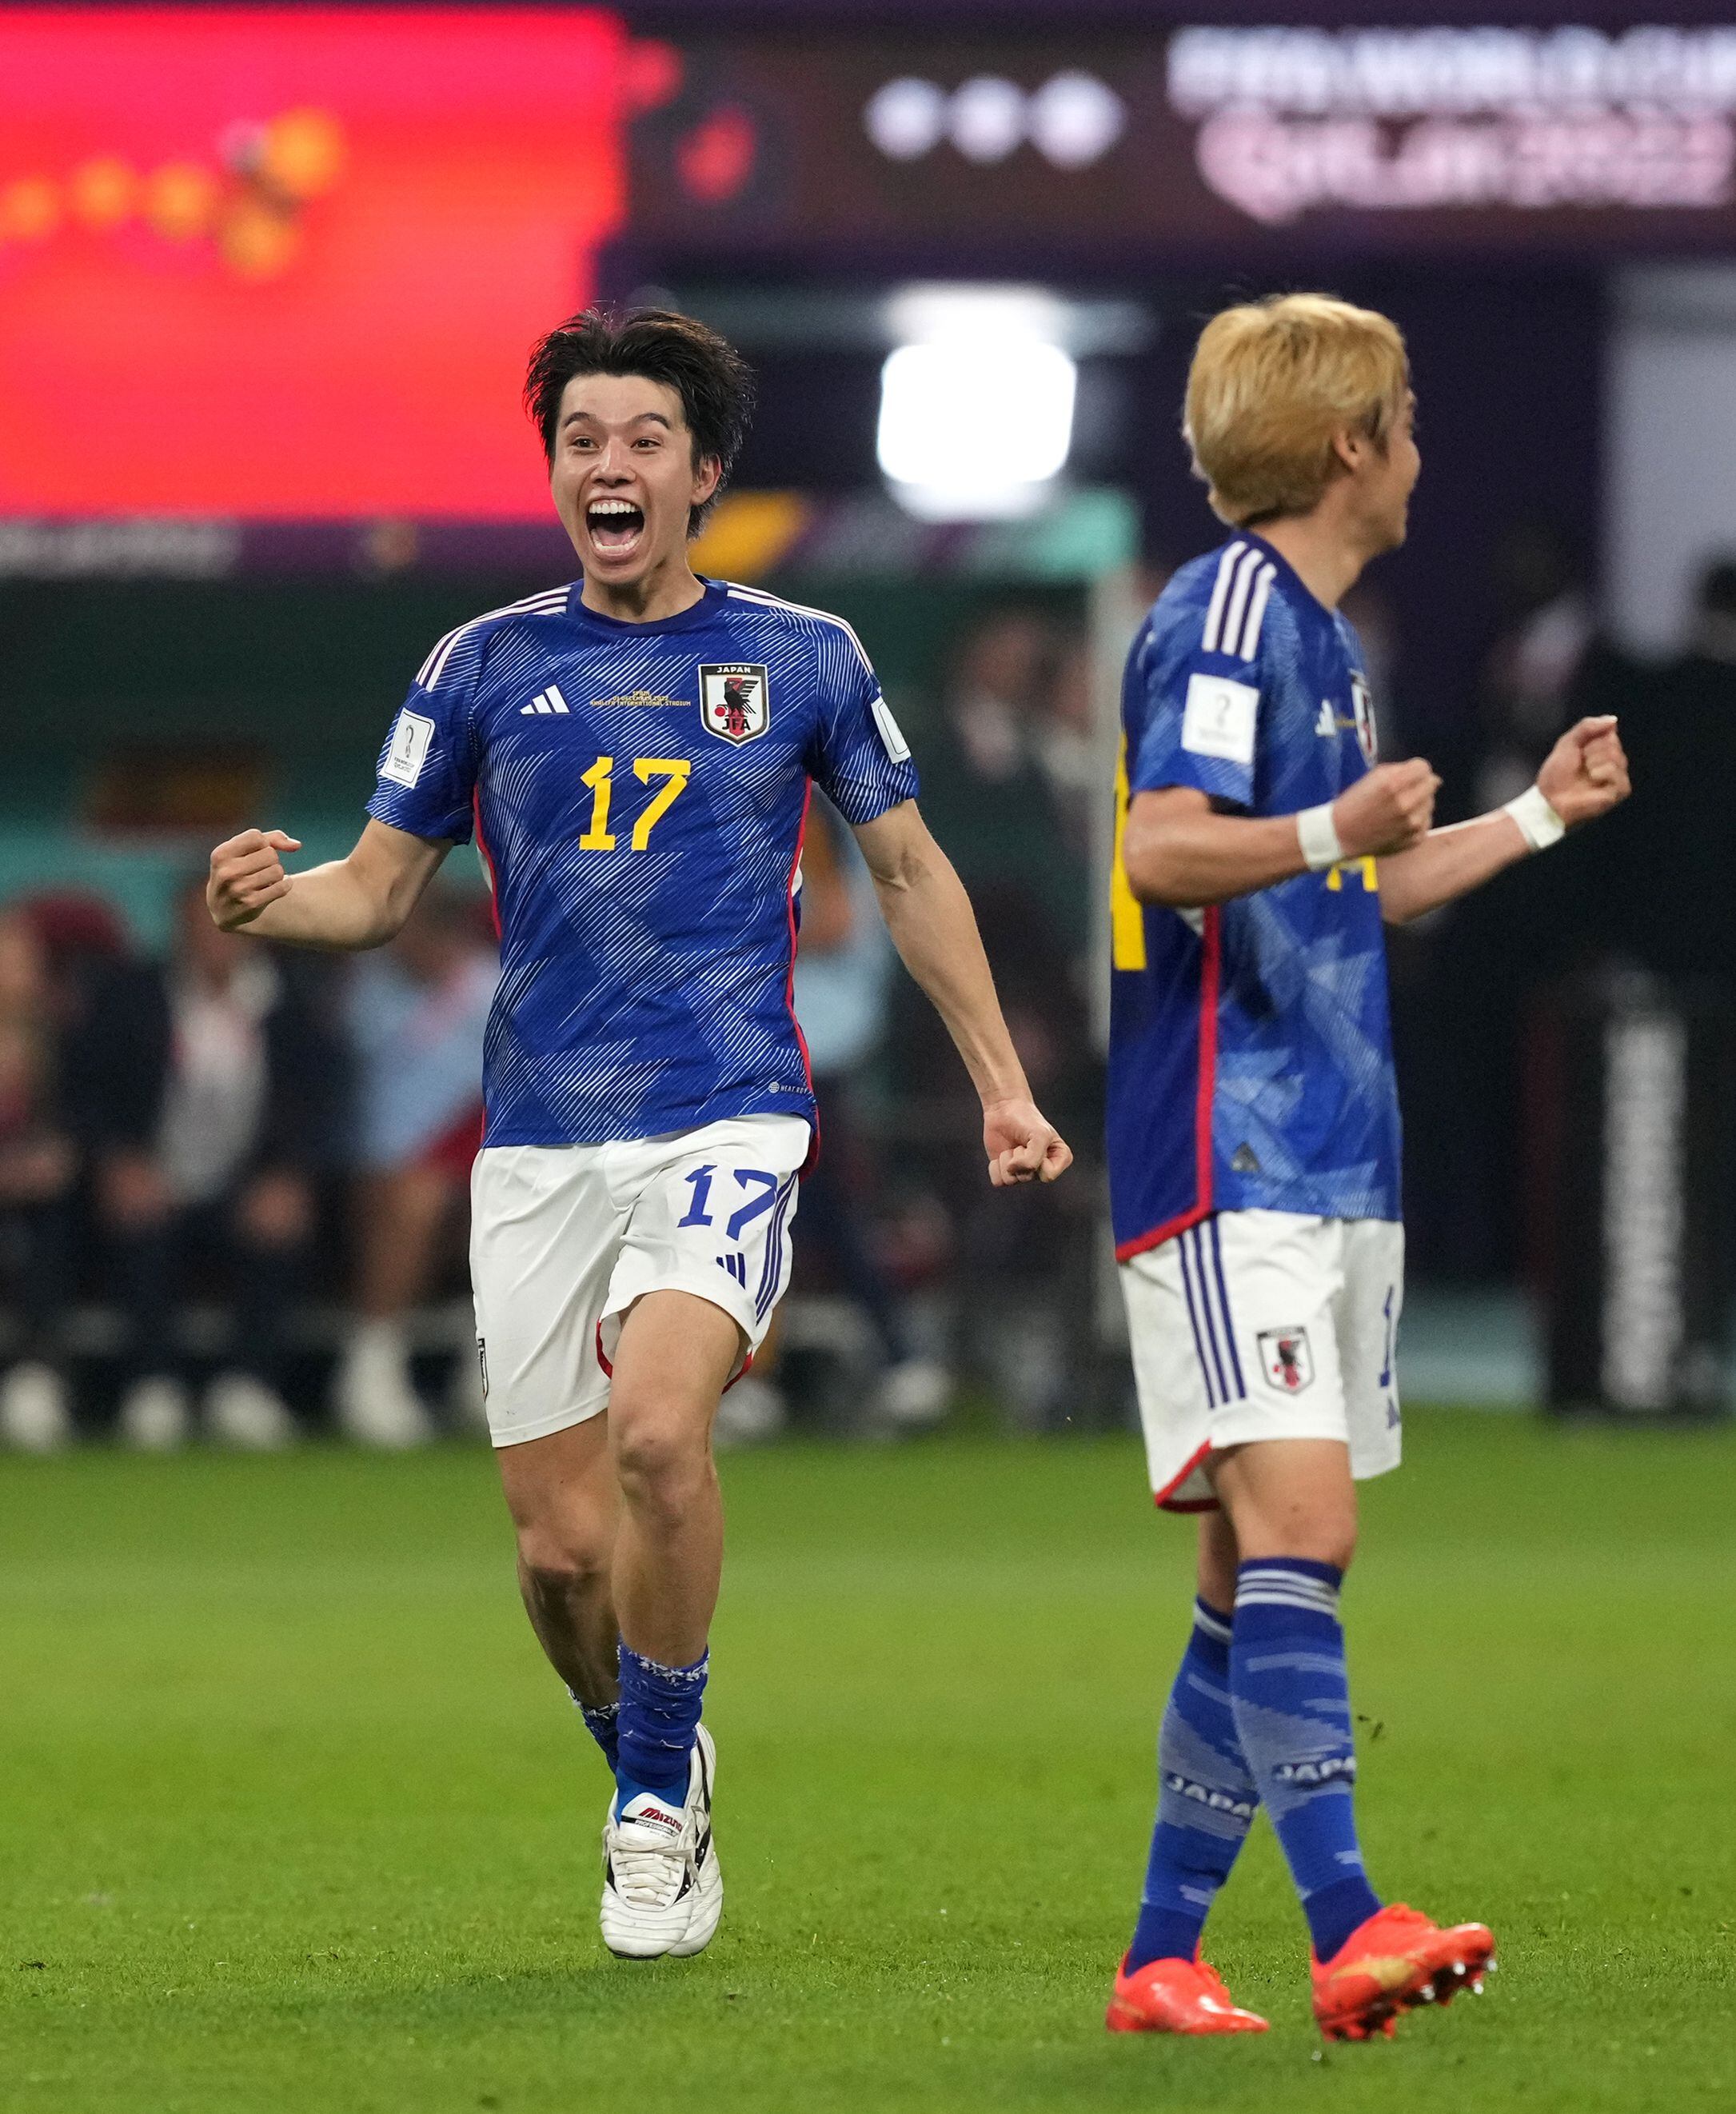 Ritsu Doan (L) of Japan vies for the ball with Alejandro Balde of